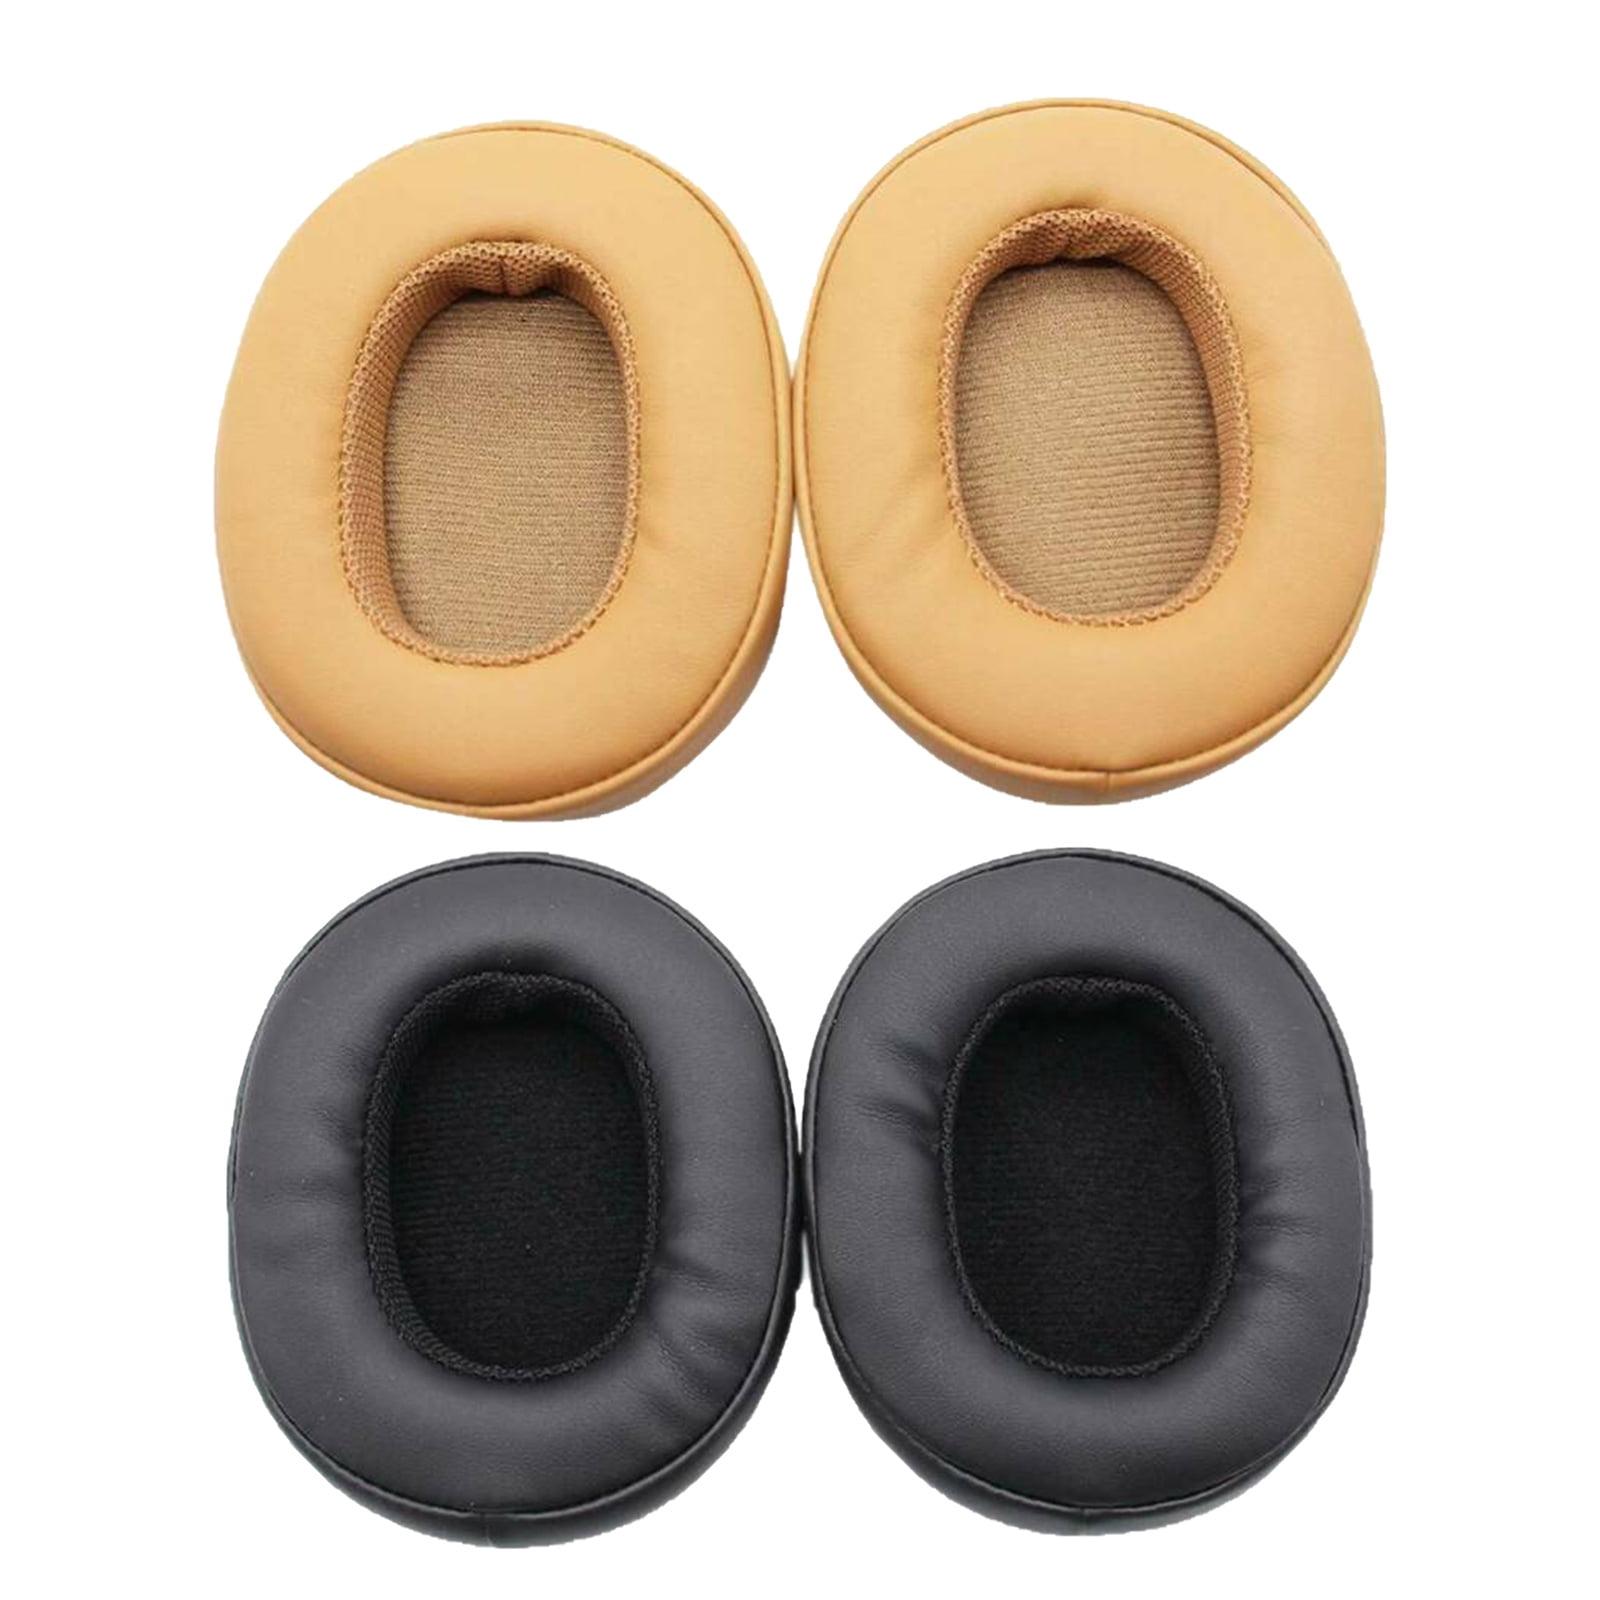 Over-Ear Leather Replacement Ear Cushions, Upgraded Ear Pads